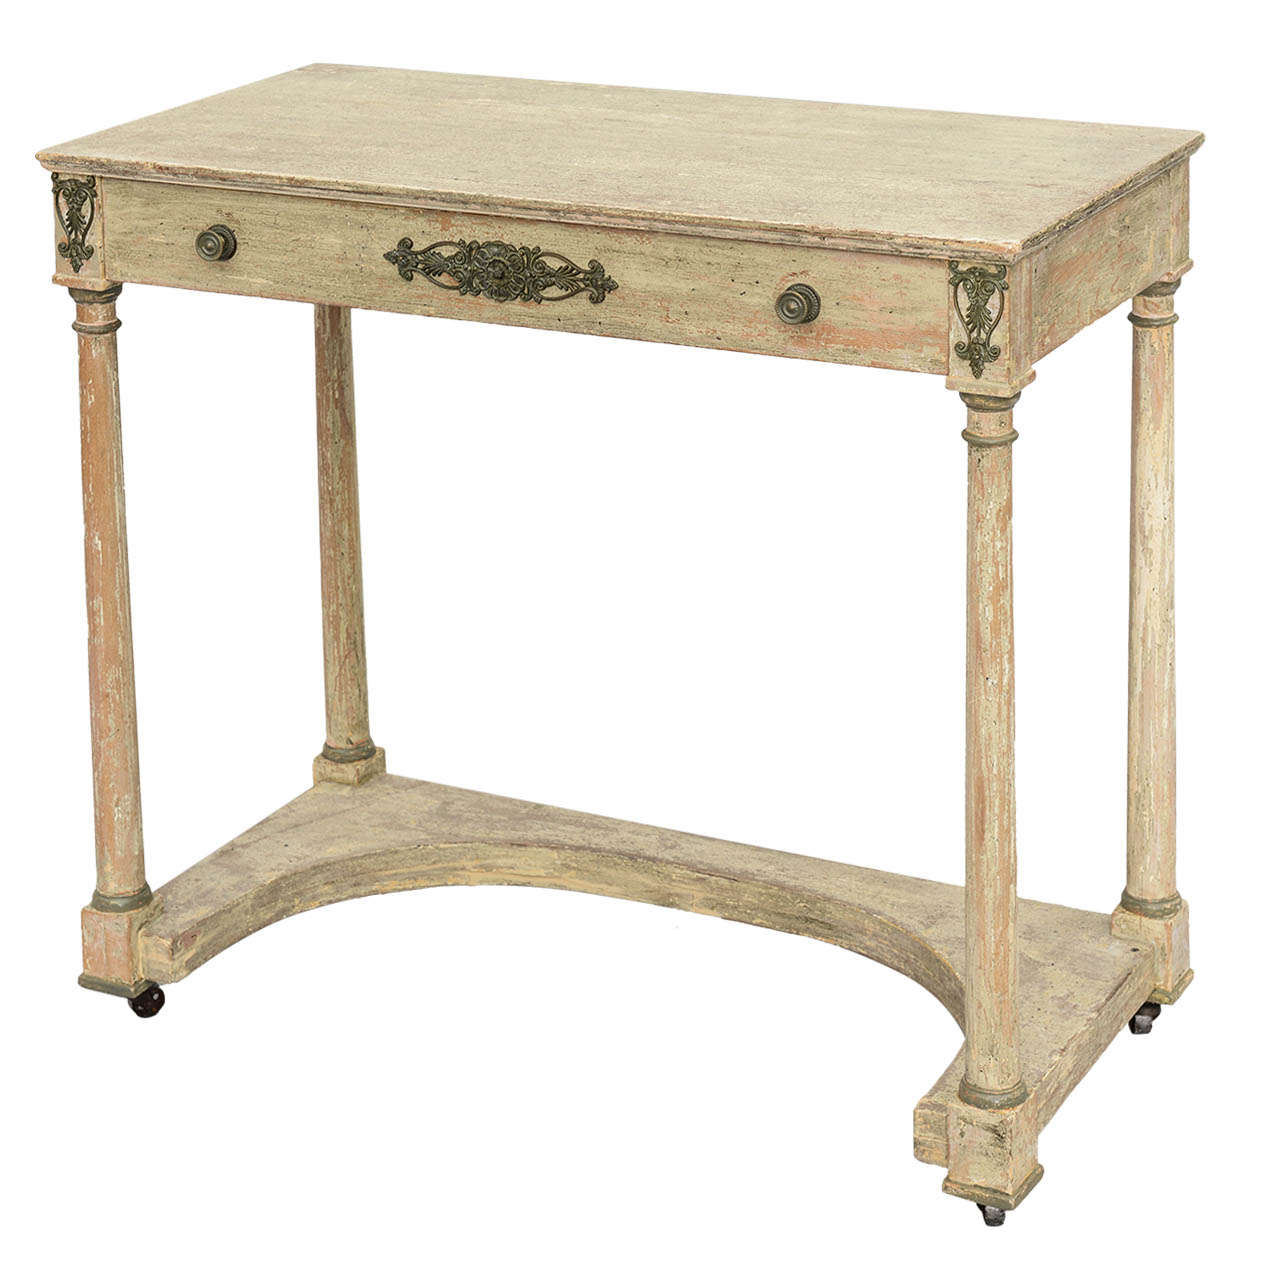 Painted, French Empire Console Table